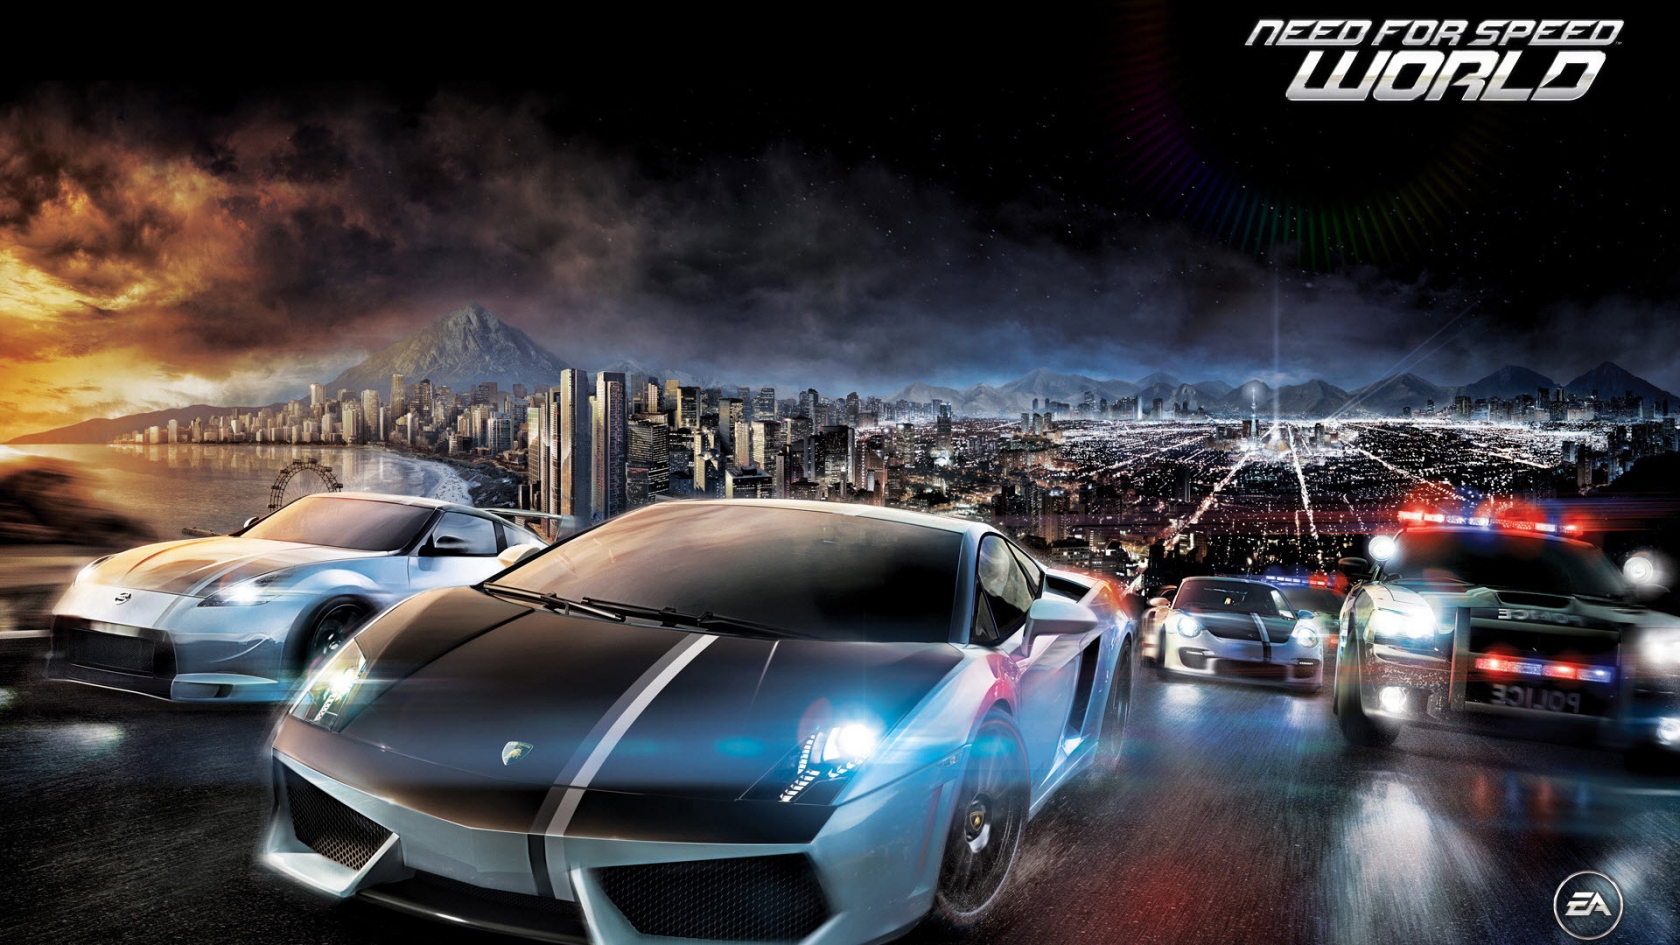 Need for Speed World for 1680 x 945 HDTV resolution